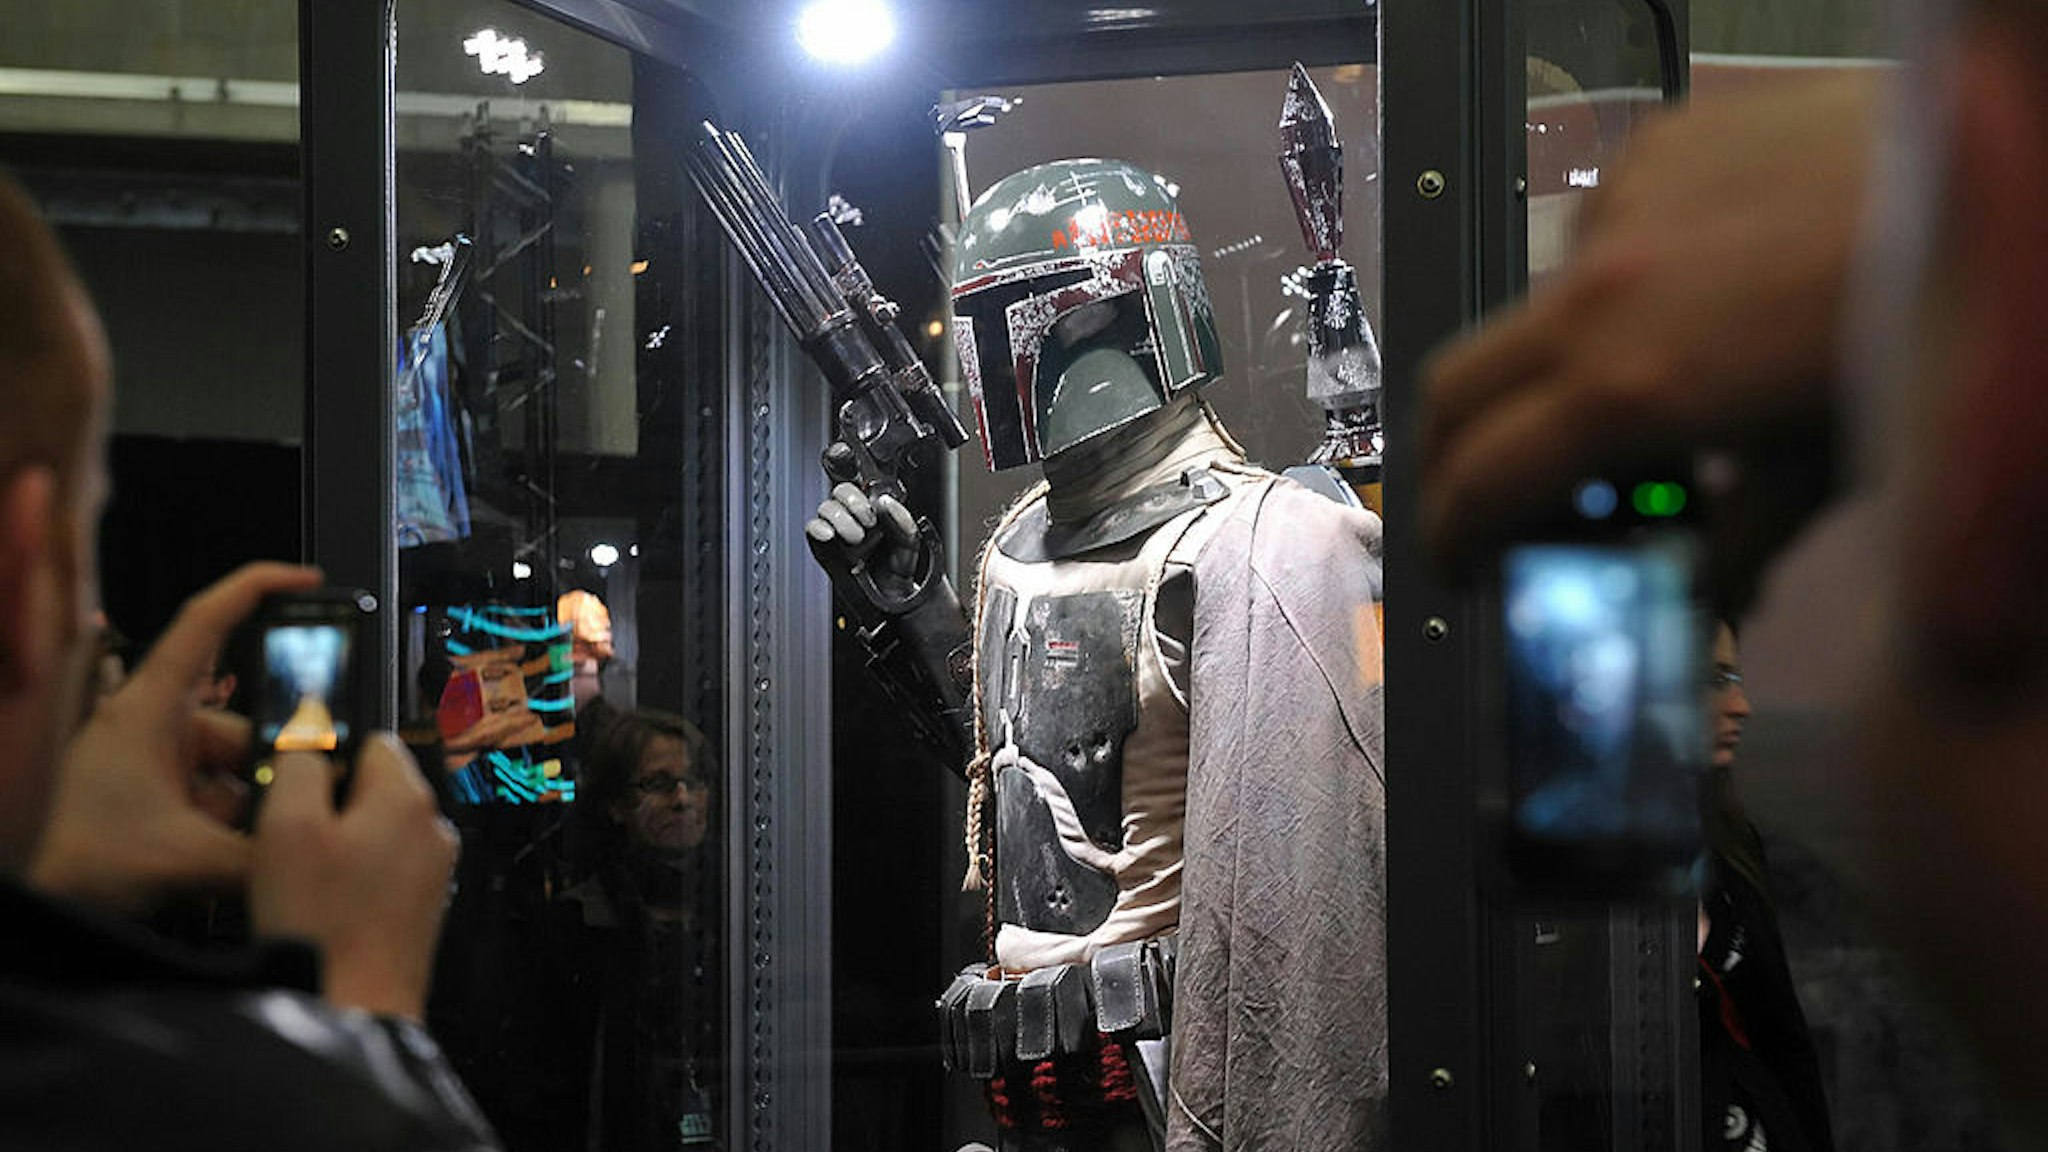 People take pictures of a Boba Fett model before the world premiere of 'Star Wars: A Musical Journey' at the O2 Arena in east London, on April 10, 2009.. The show features an extensive selection of composer John Williams' scores from all six Star Wars movies in a two-hour musical event which includes scenes from the movies, live narration and, at the O2, the 86 piece Royal Philharmonic Orchestra and Choir. AFP PHOTO/Leon Neal (Photo credit should read Leon Neal/AFP via Getty Images)